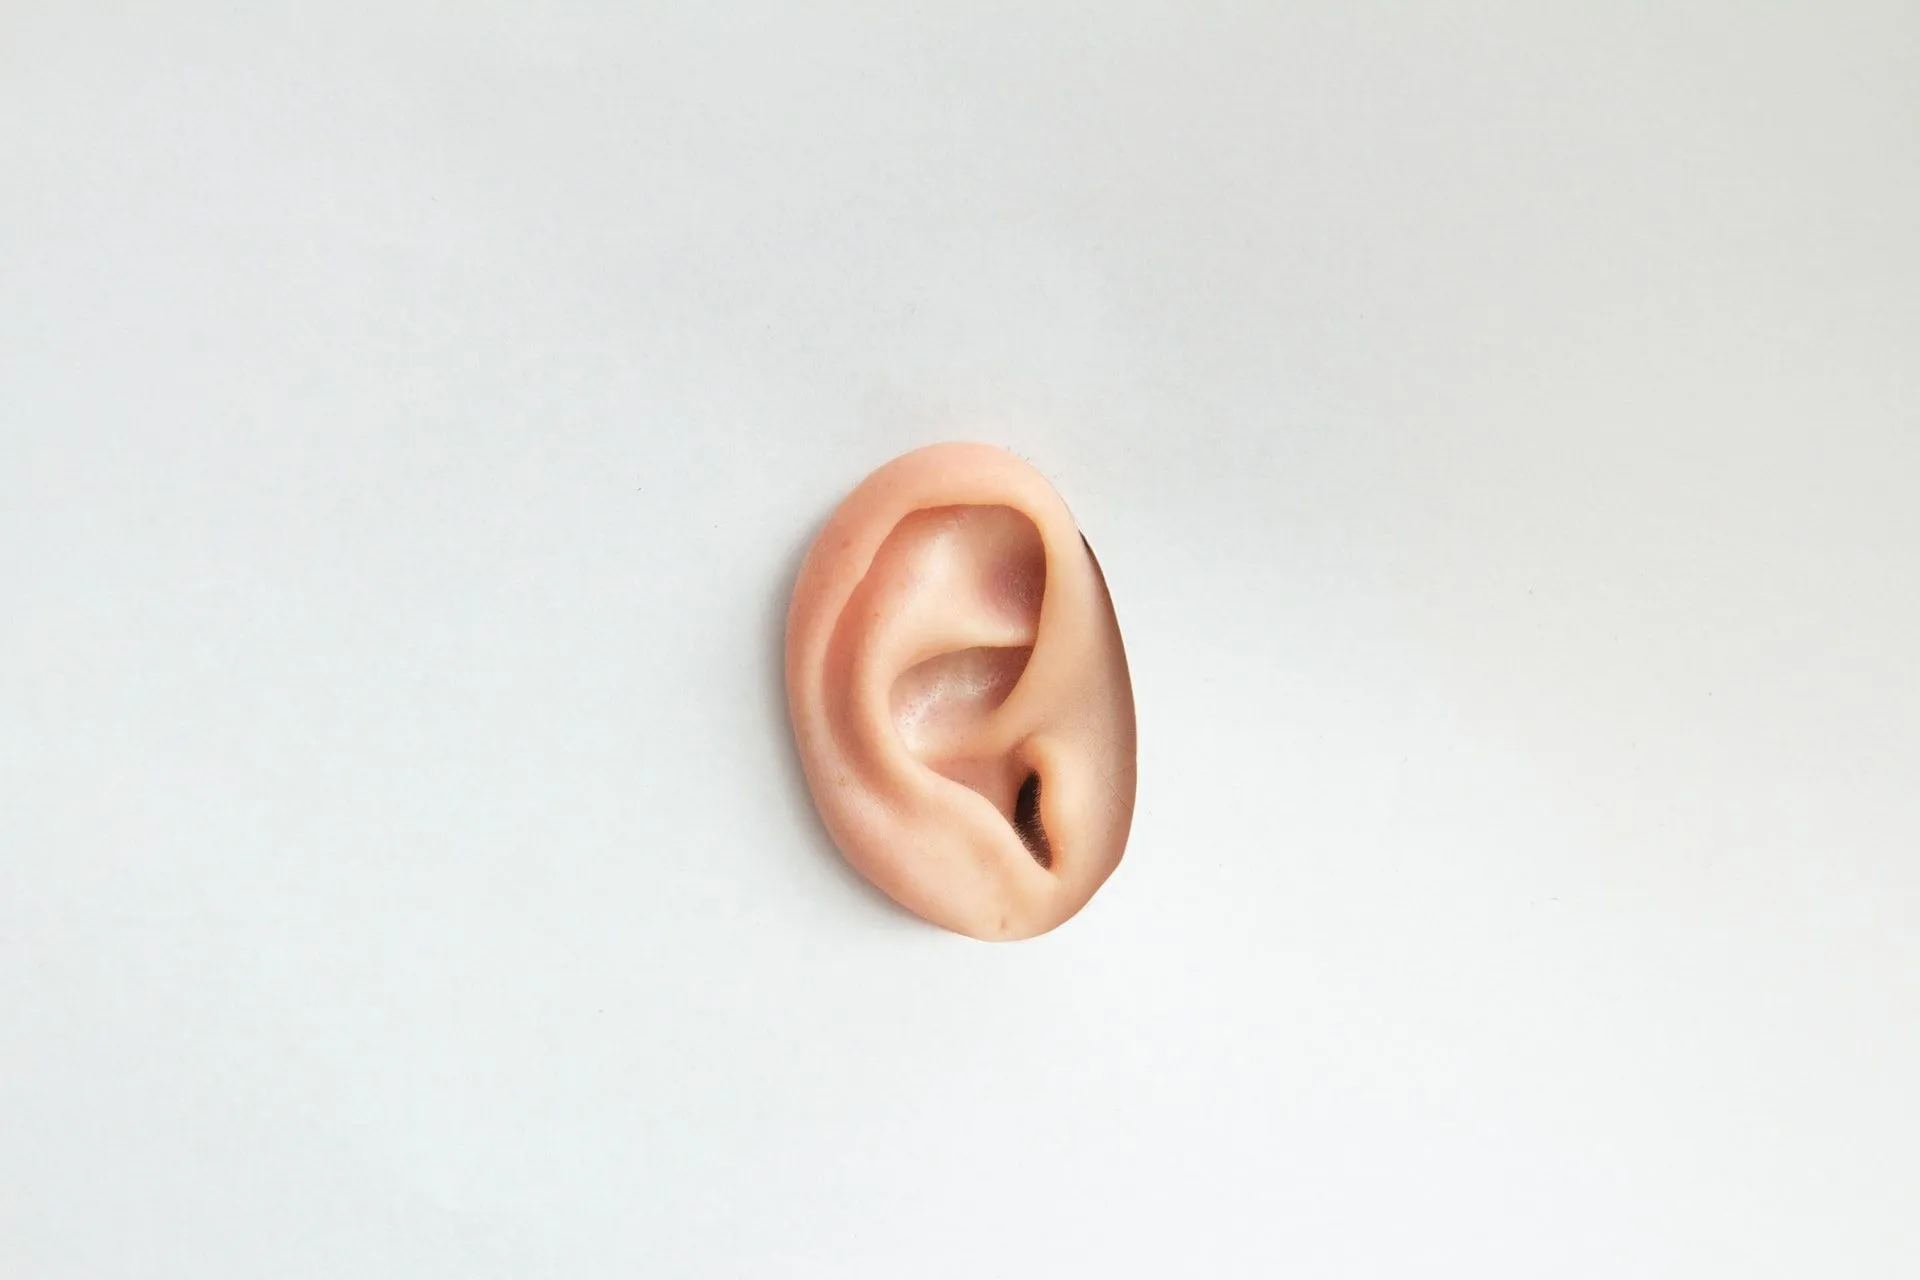 The ear is where the tiniest bone of the human body is found.